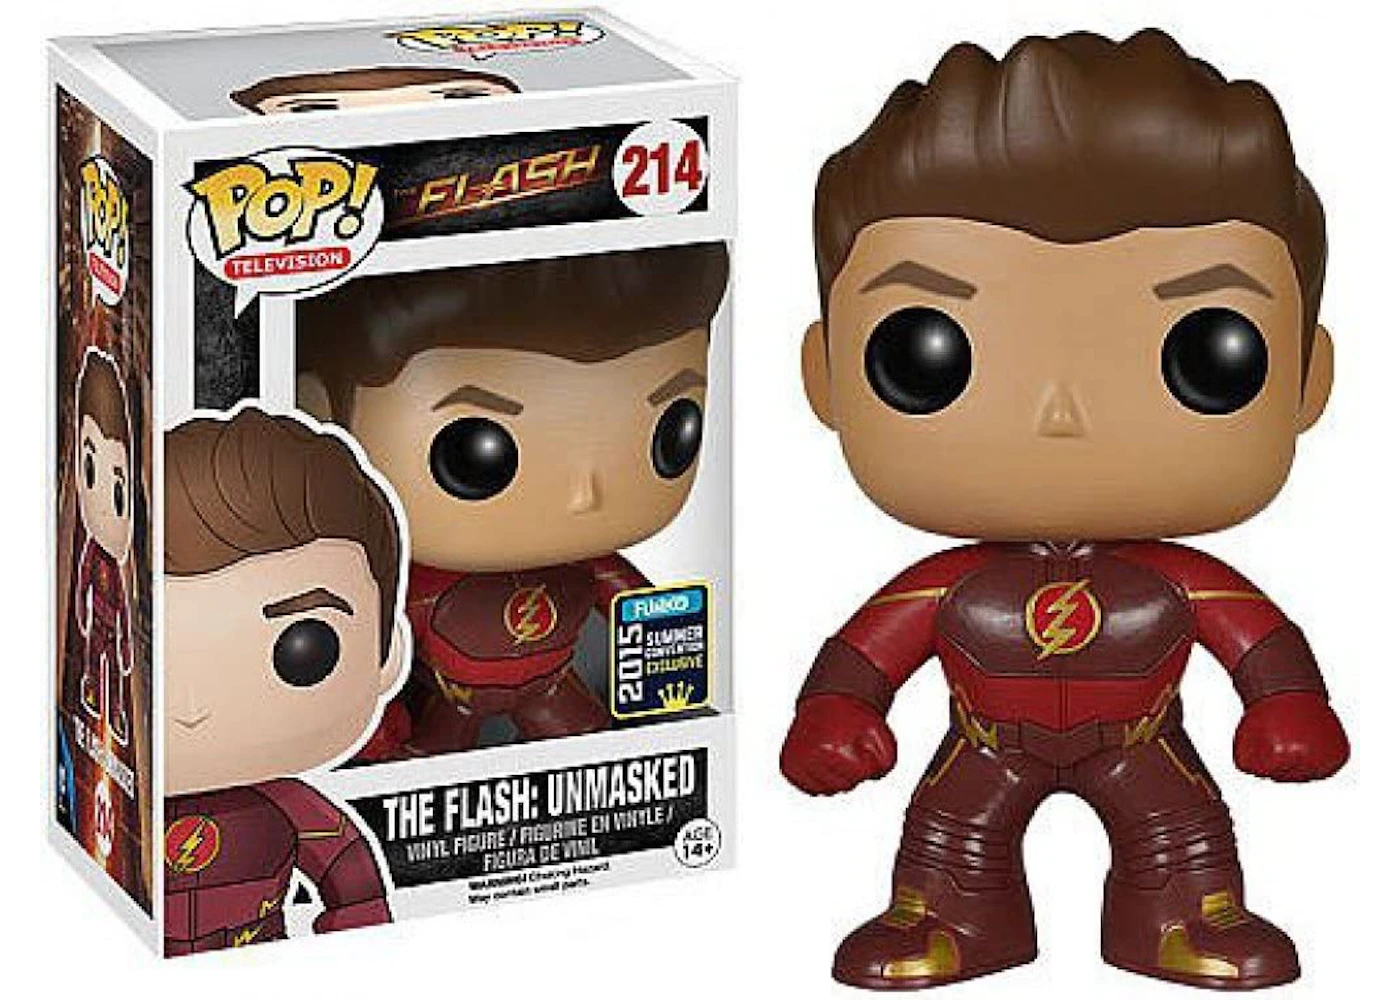 Moskee achterlijk persoon taxi Funko Pop! Television The Flash Unmasked Summer Convention Exclusive Figure  #214 Funko Pop - US